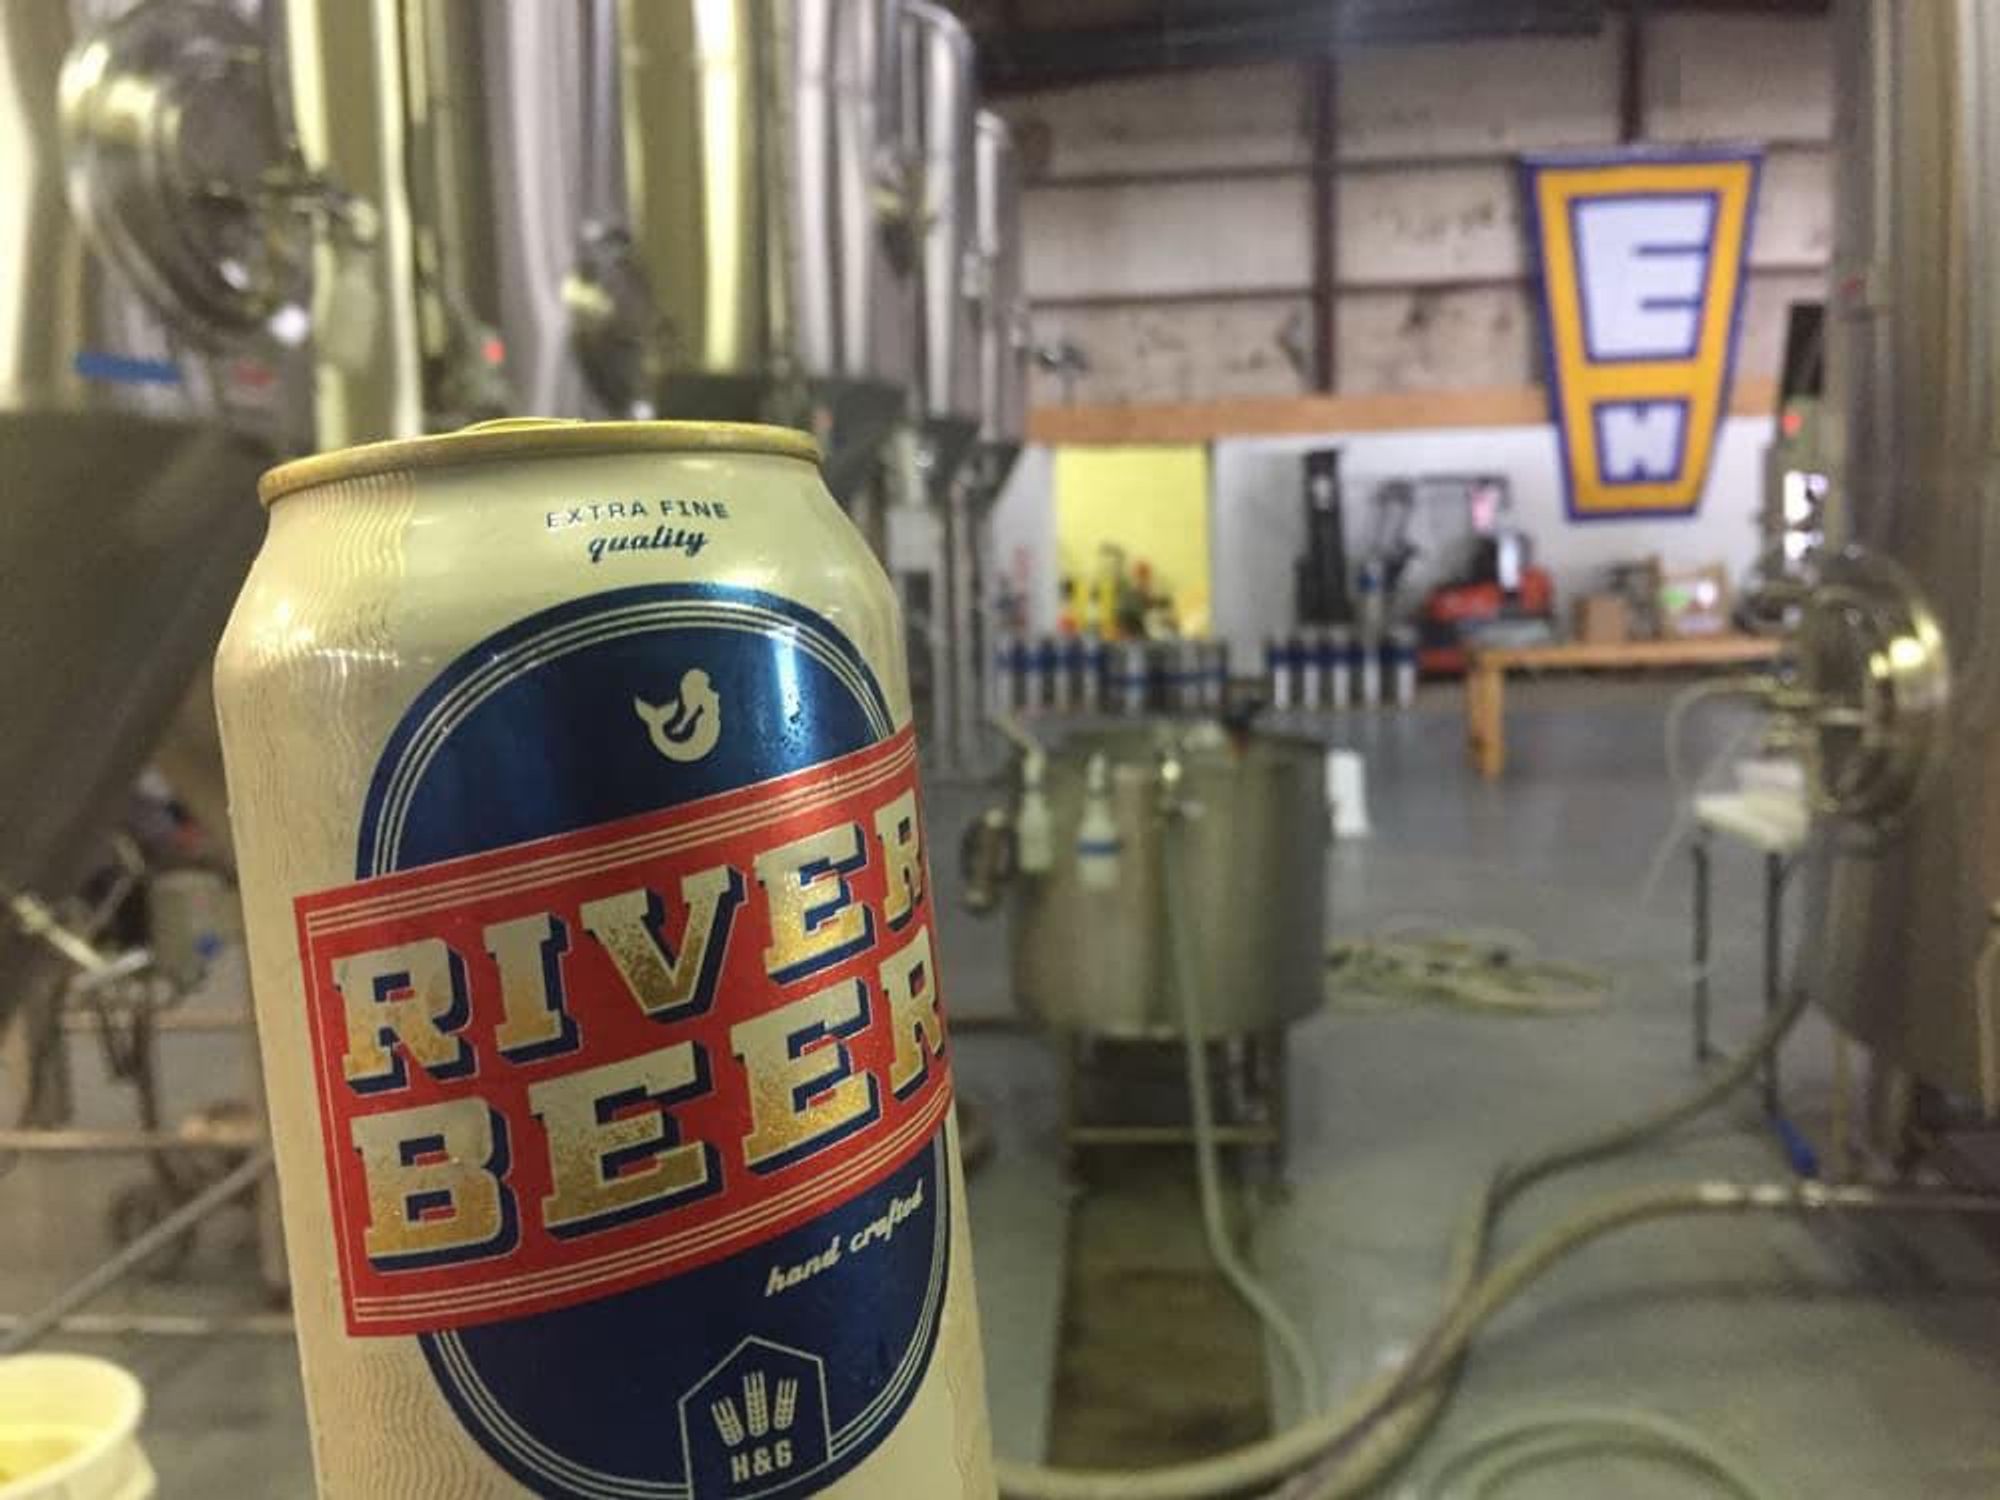 Hops and Grain Brewing River Beer can